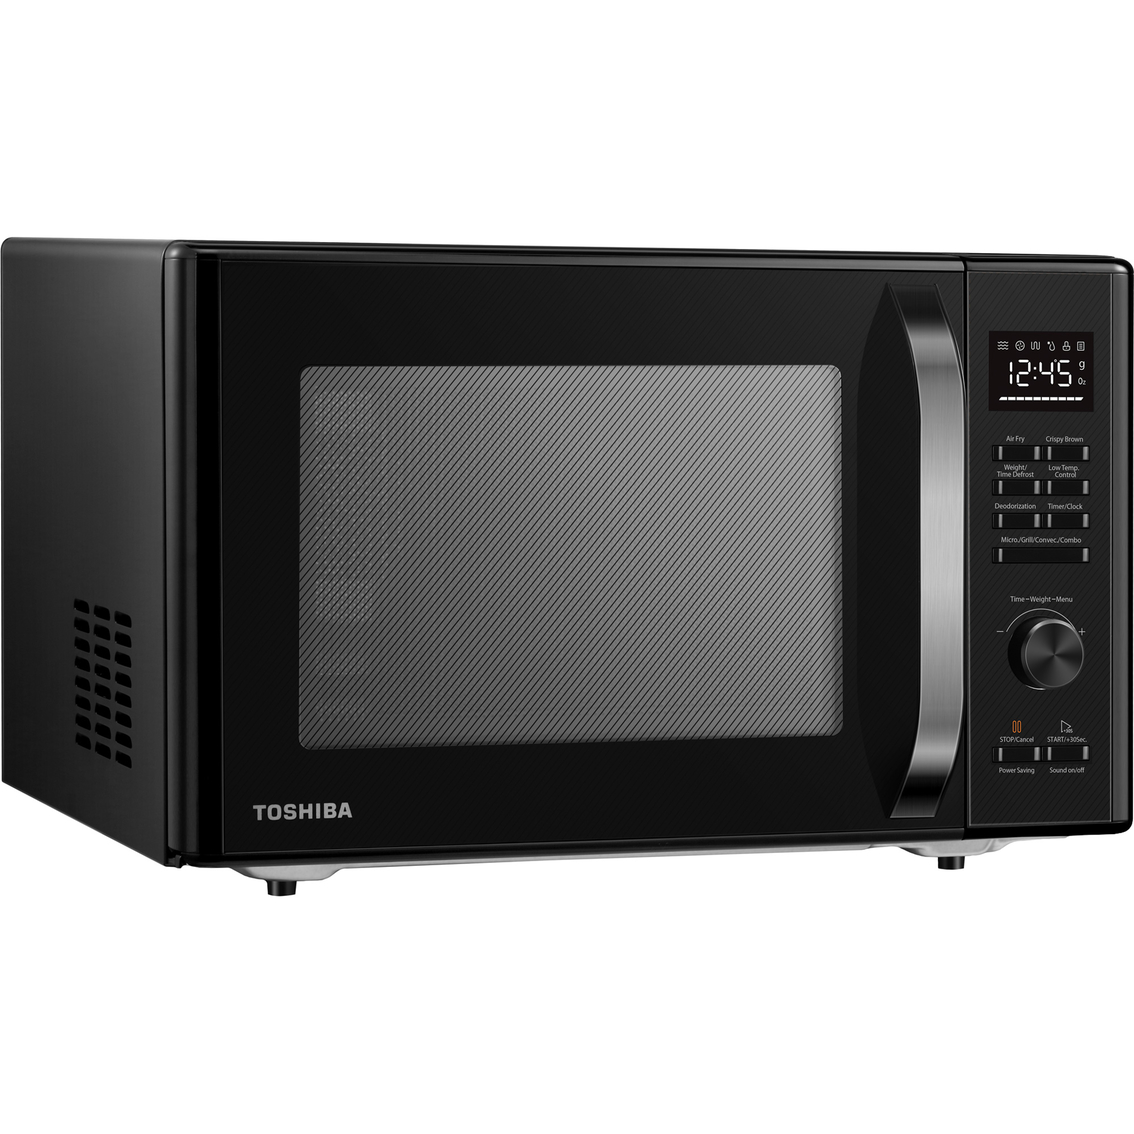 Toshiba 1 cu. ft. 6-in-1 Multifunction Versa Microwave Oven - Image 3 of 7